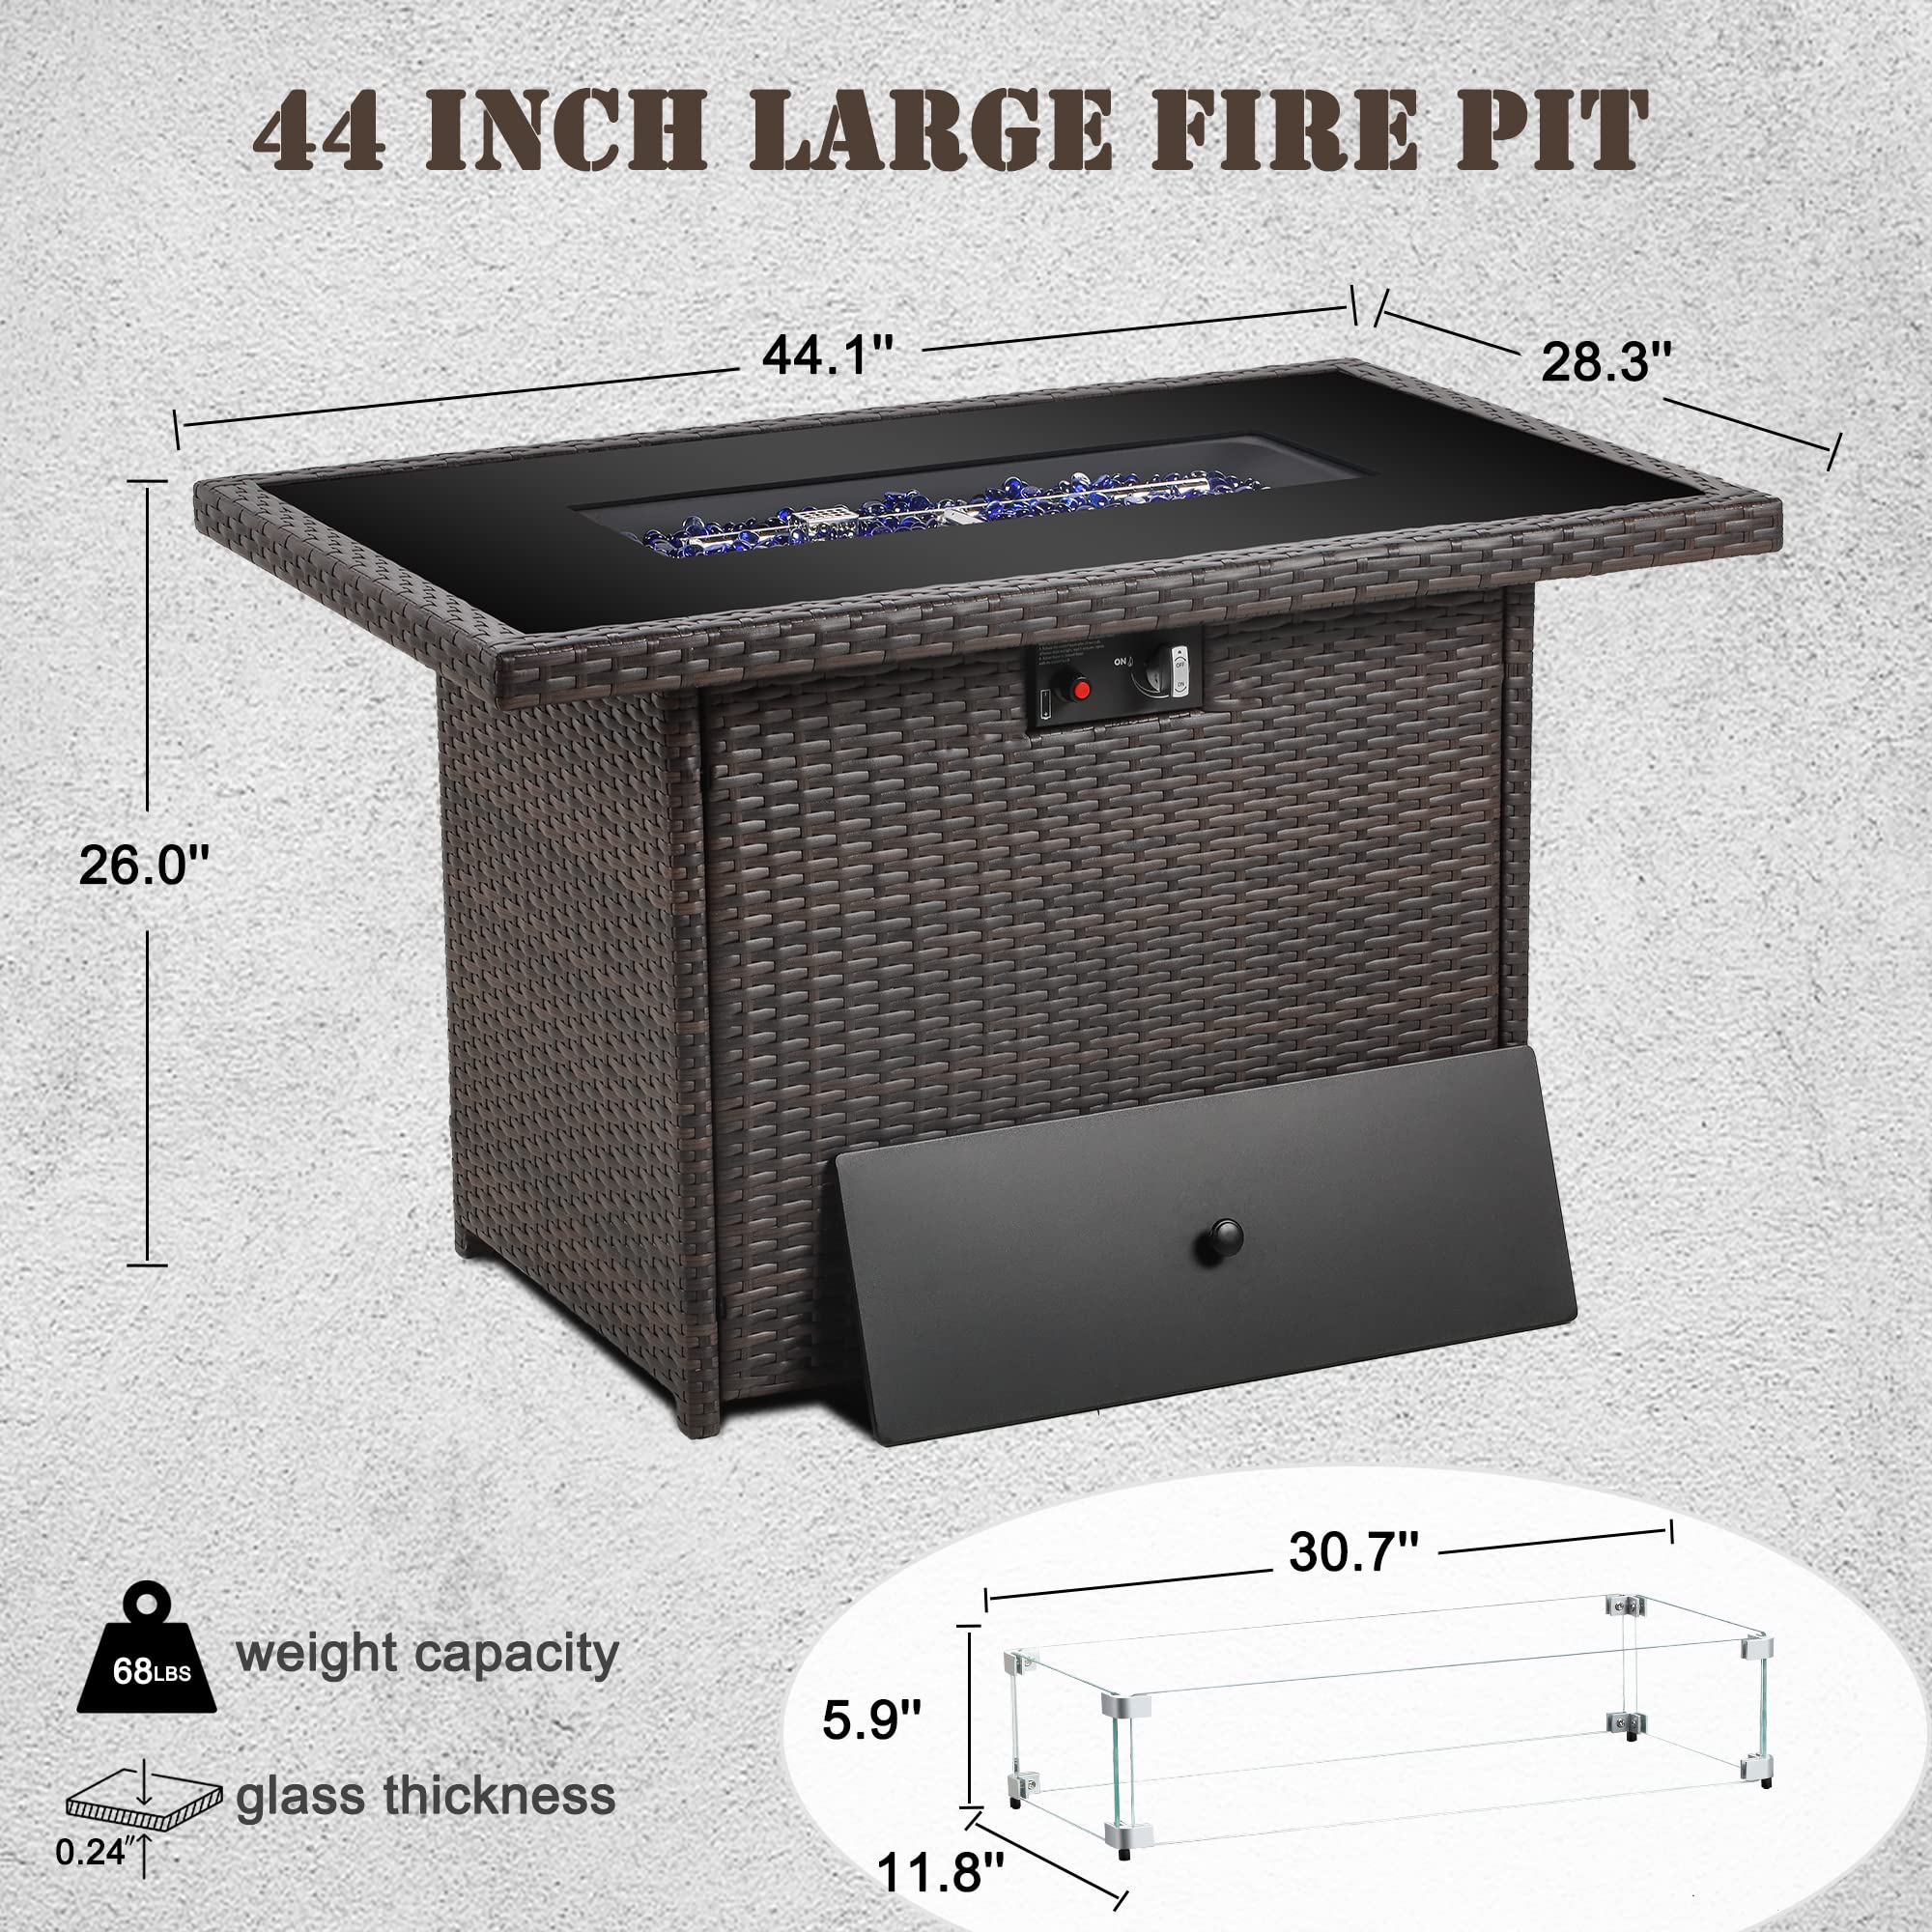 Vakollia Propane Fire Pit Table,44 Inch 55000 BTU Outdoor Gas Fire Pit Rectangular with Glass Wind Guard for Outside Patio Deck (Brown-Glass Top)